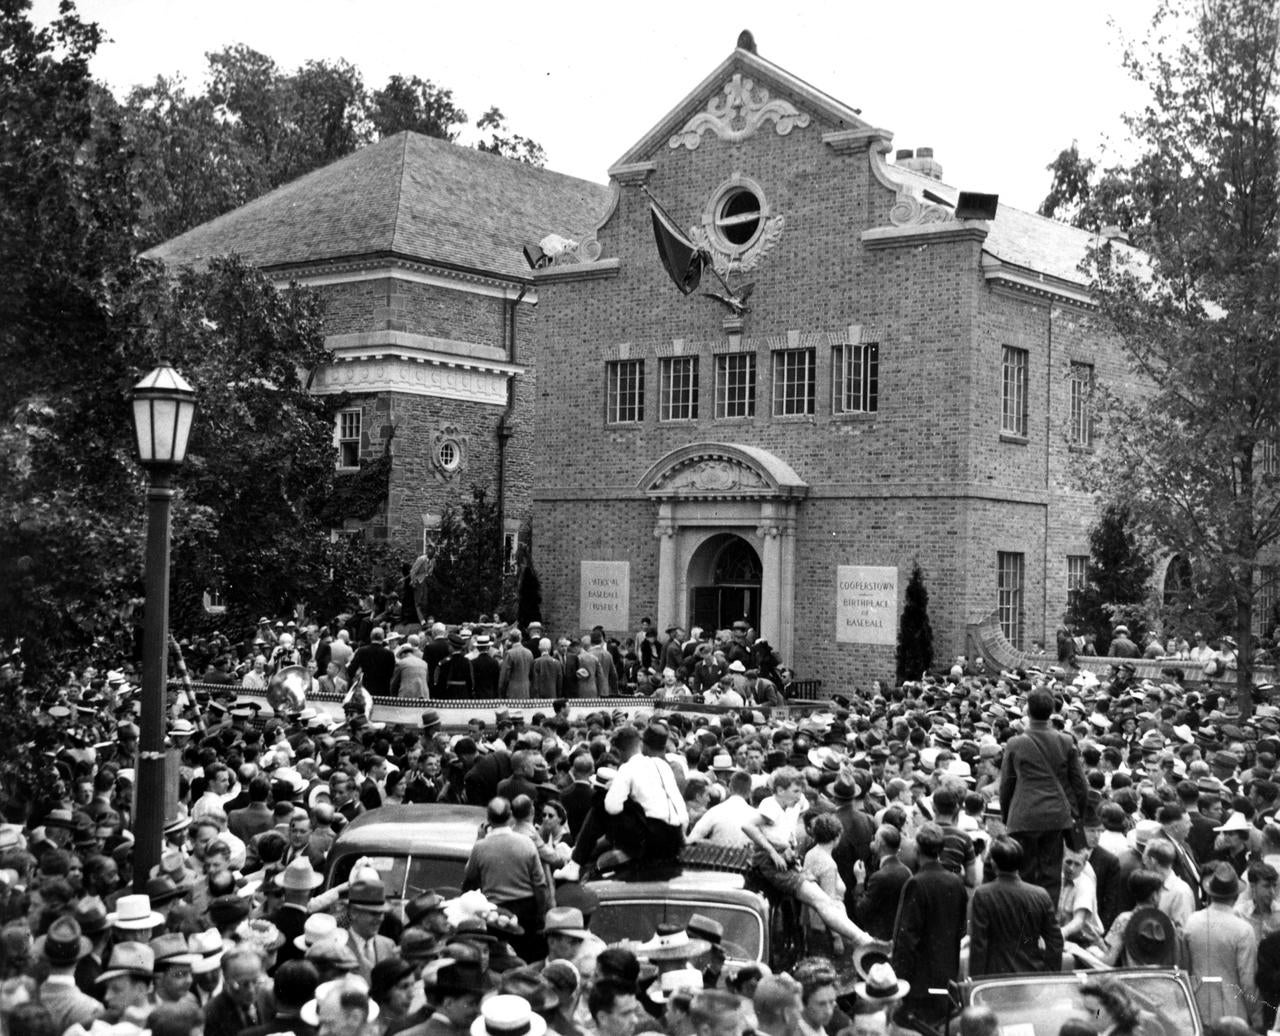 Opening of the Baseball Hall of Fame with Babe Ruth and Cy Young